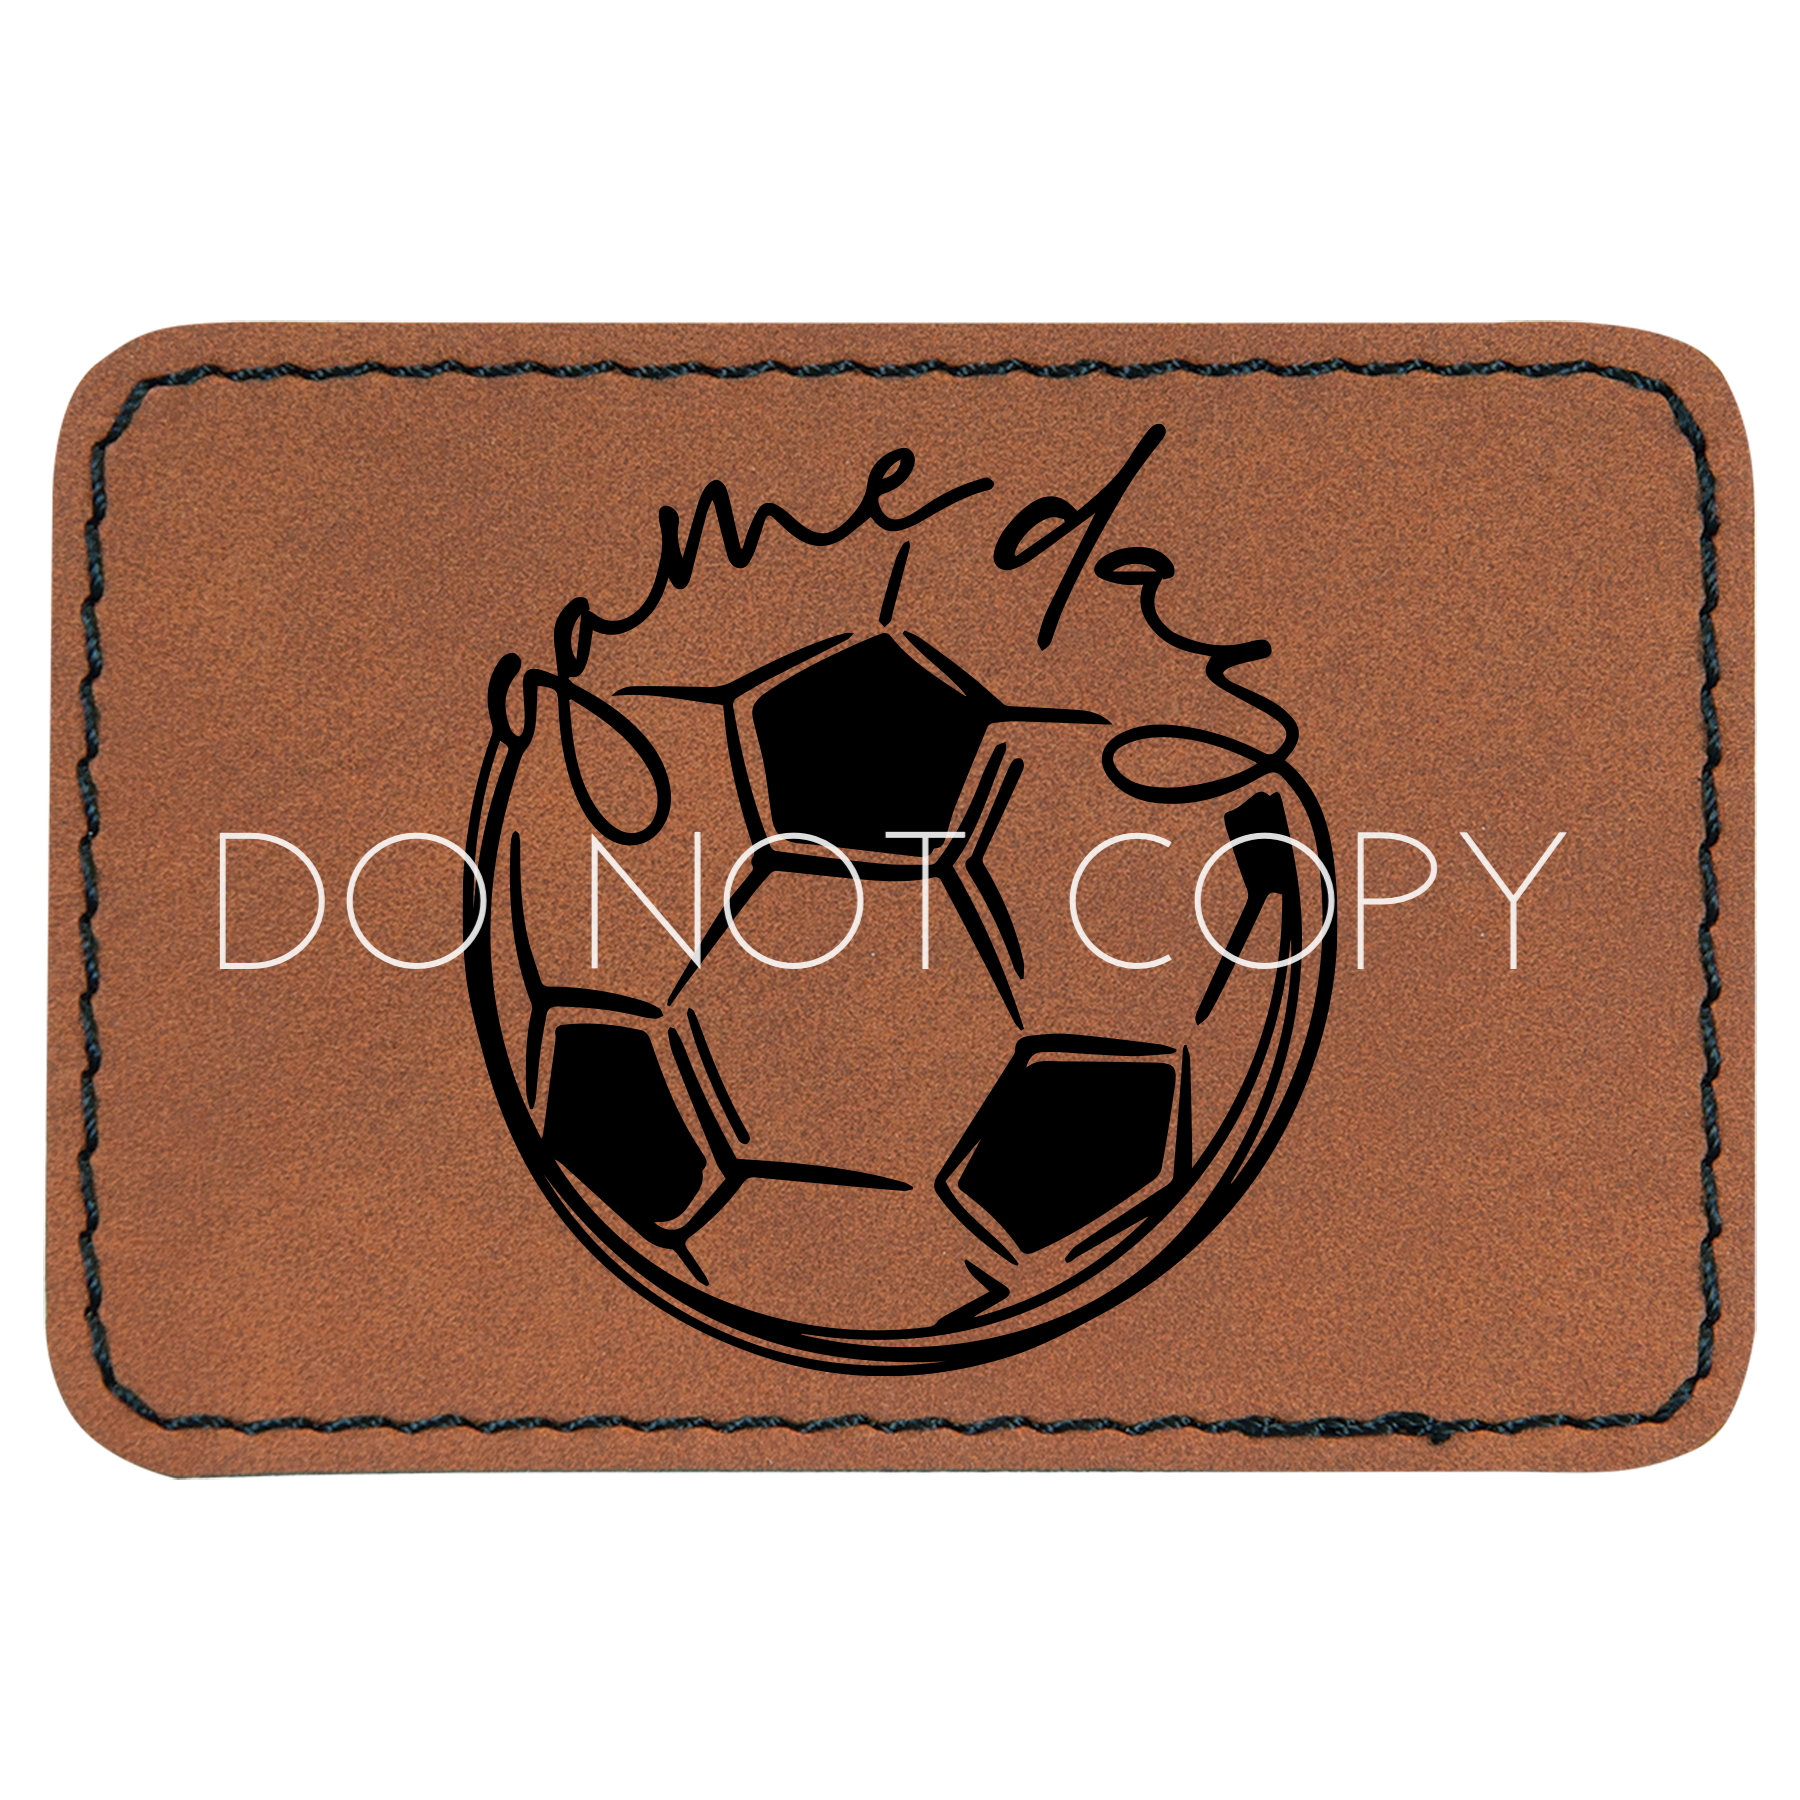 Doodle Soccer Game Day Patch